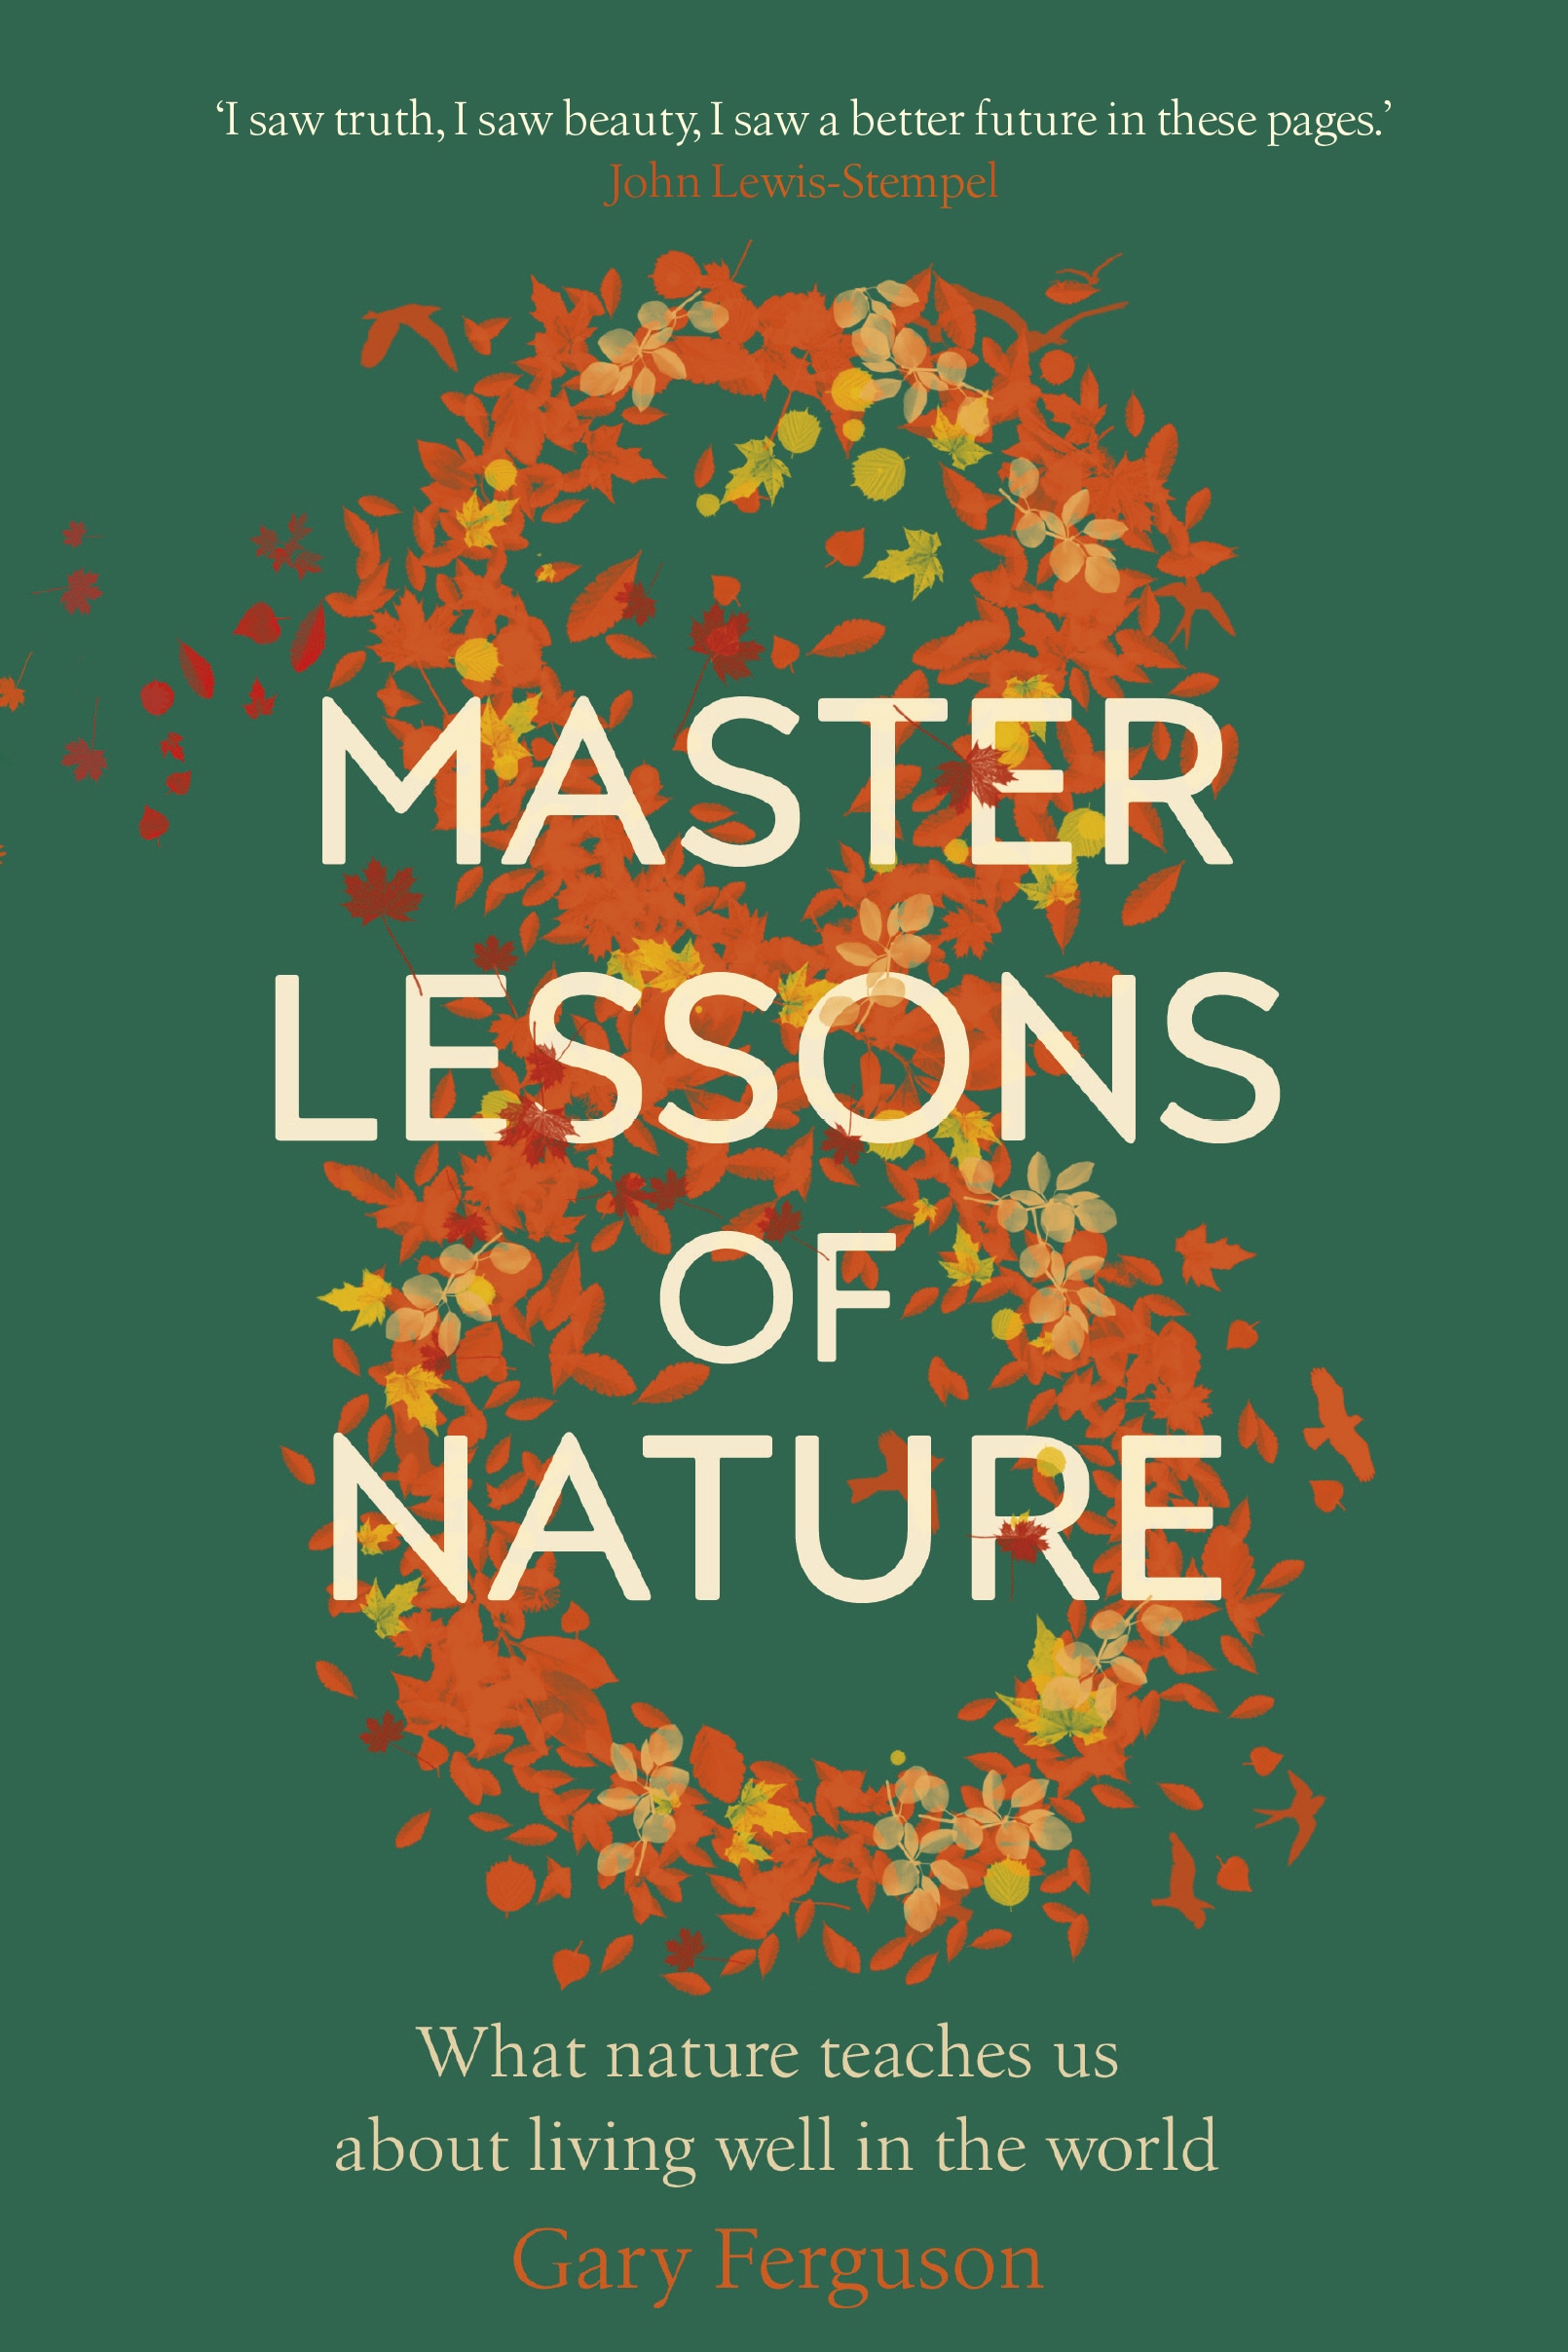 Book “Eight Master Lessons of Nature” by Gary Ferguson — October 31, 2019